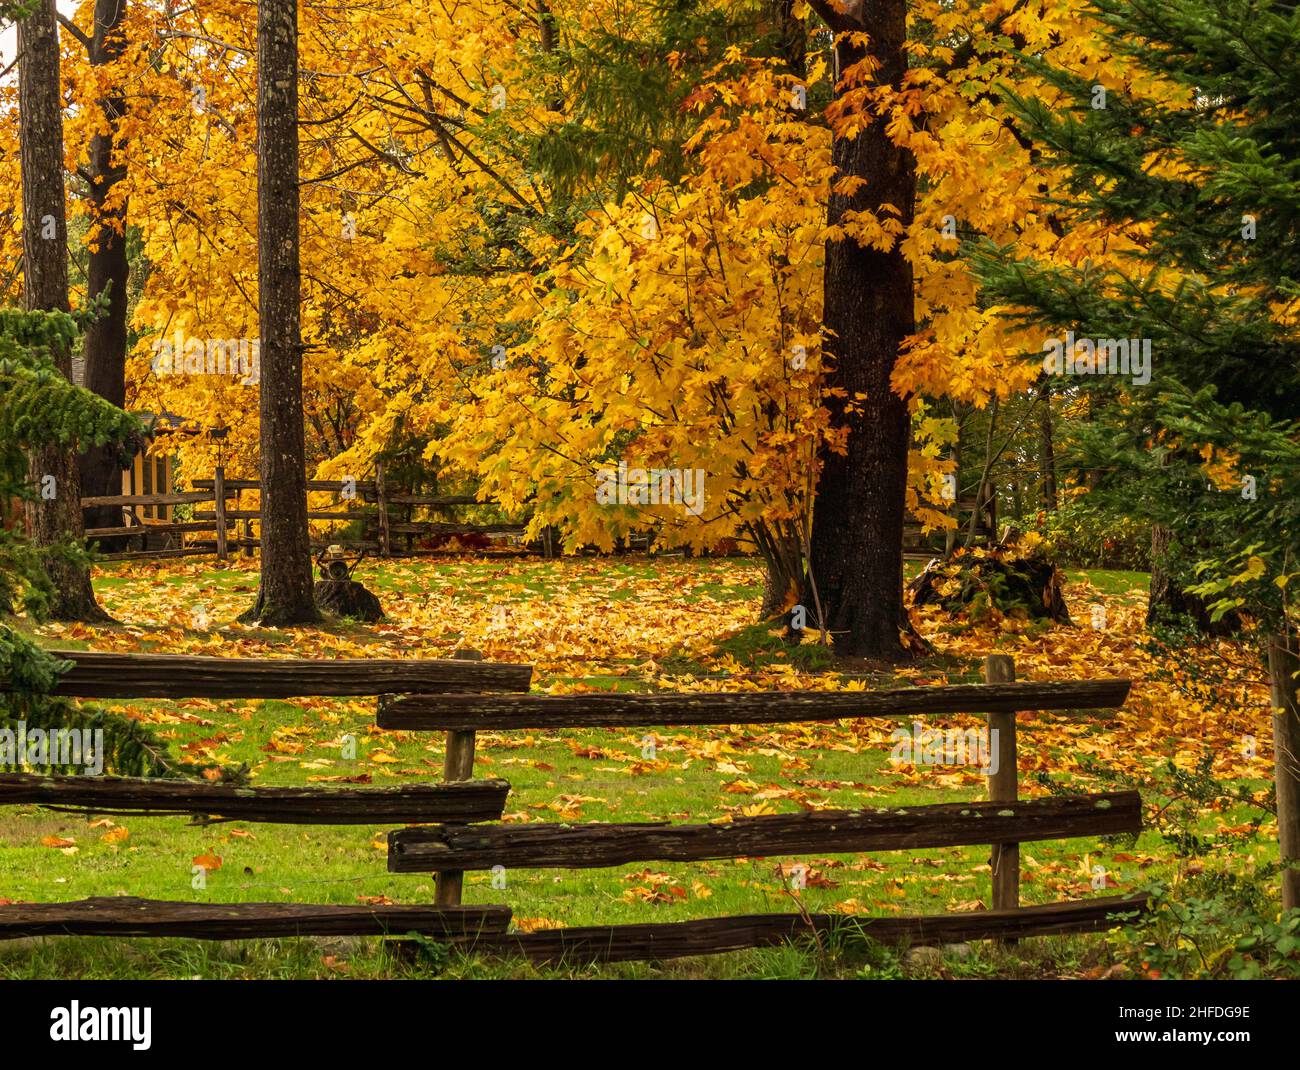 Grassy field in a farmyard with yellow and orange maple leaves on the ground.  Fir trees also.  Rustic wooden fence around the field. Stock Photo